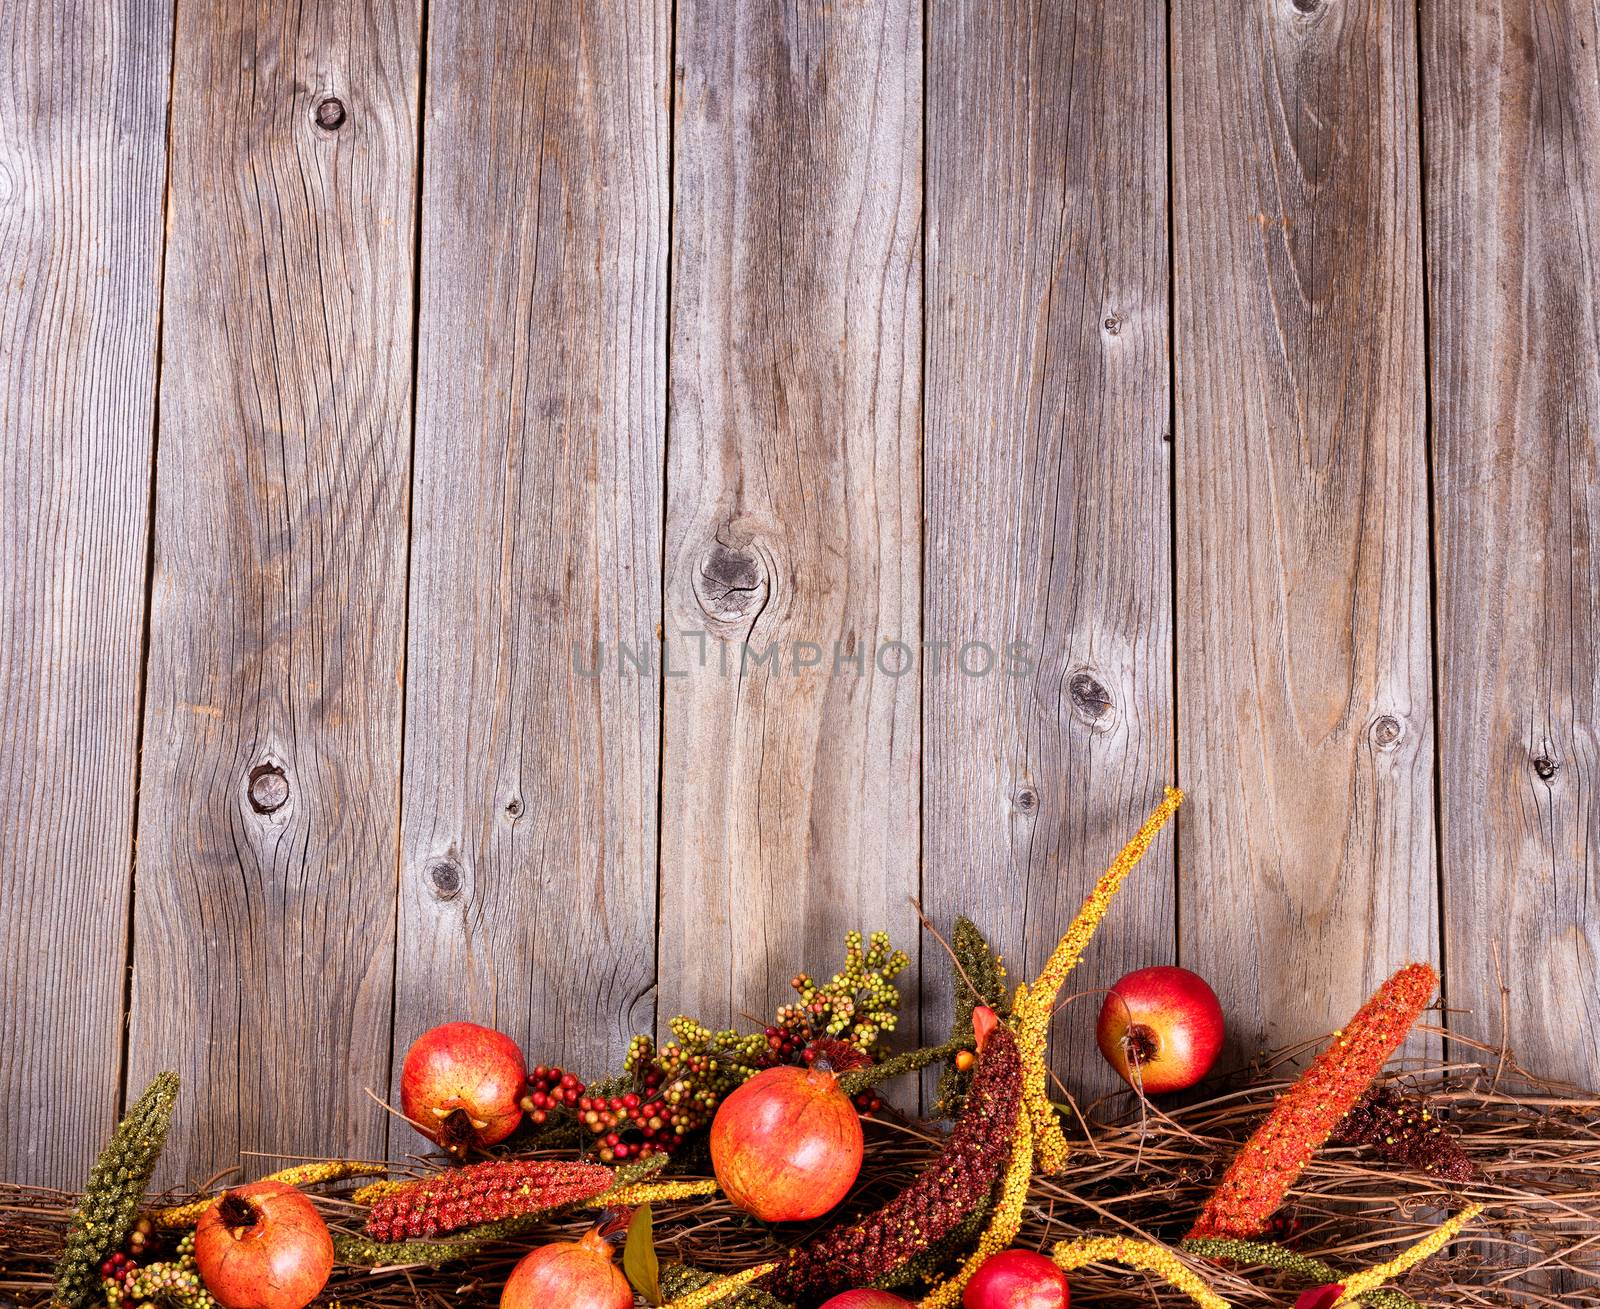 Bottom border of autumn holiday decorations on rustic wooden boa by tab1962